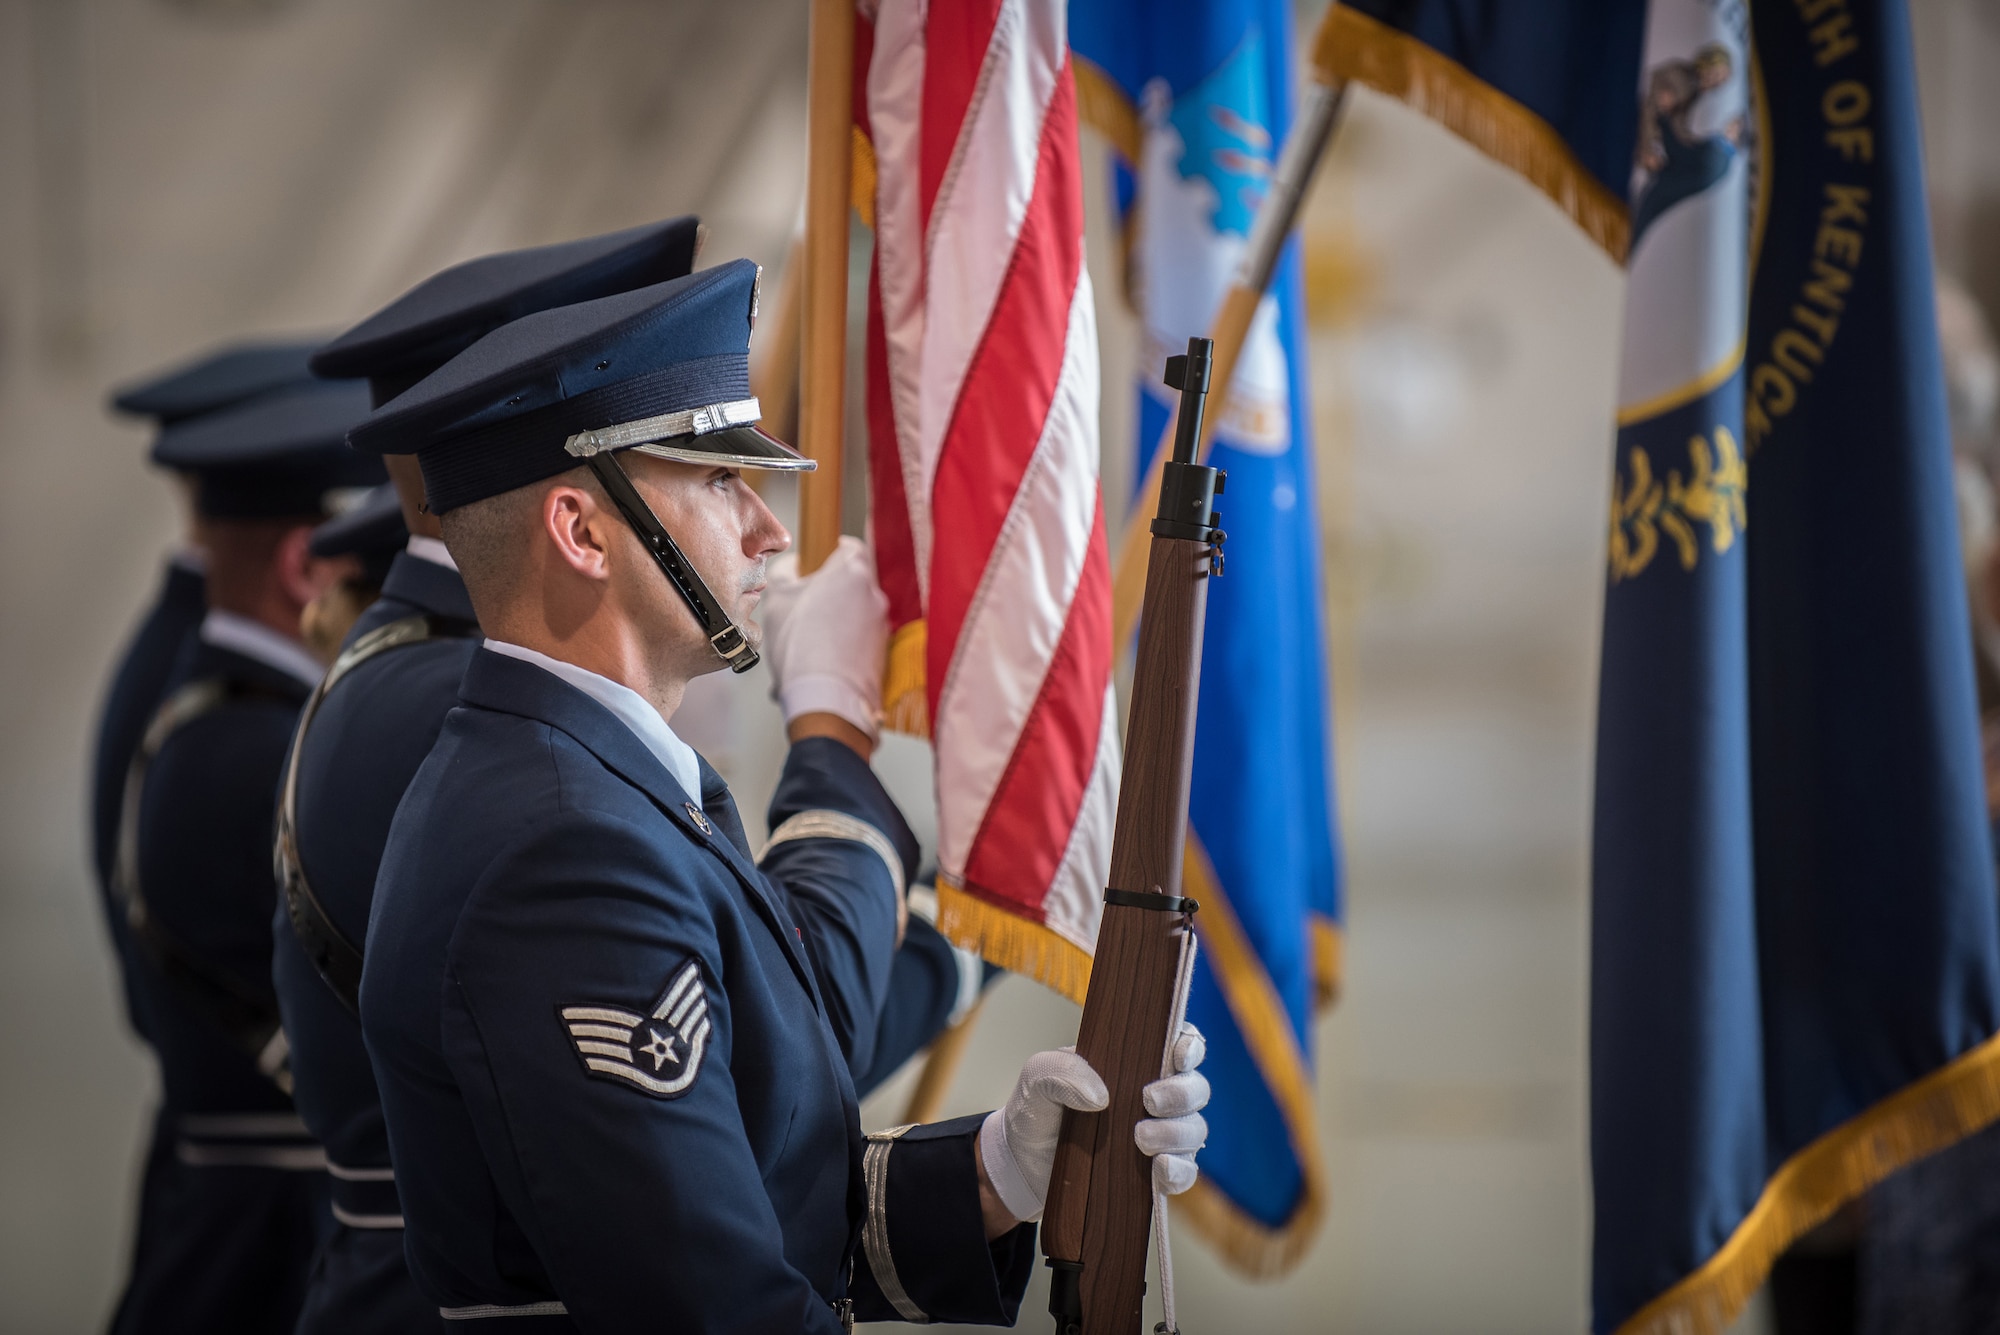 The 123rd Airlift Wing Honor Guard presents the colors during a ceremony to bestow the Distinguished Flying Cross at the Kentucky Air National Guard Base in Louisville, Ky., Aug. 10, 2019. The award recipient, Lt. Col. John " J.T." Hourigan, earned the medal for decisive action following a catastrophic mechanical failure while flying a C-130 aircraft during a routine training sortie, saving the lives of six crew members and a $30 million aircraft. (U.S. Air National Guard photo by Lt. Col. Dale Greer)